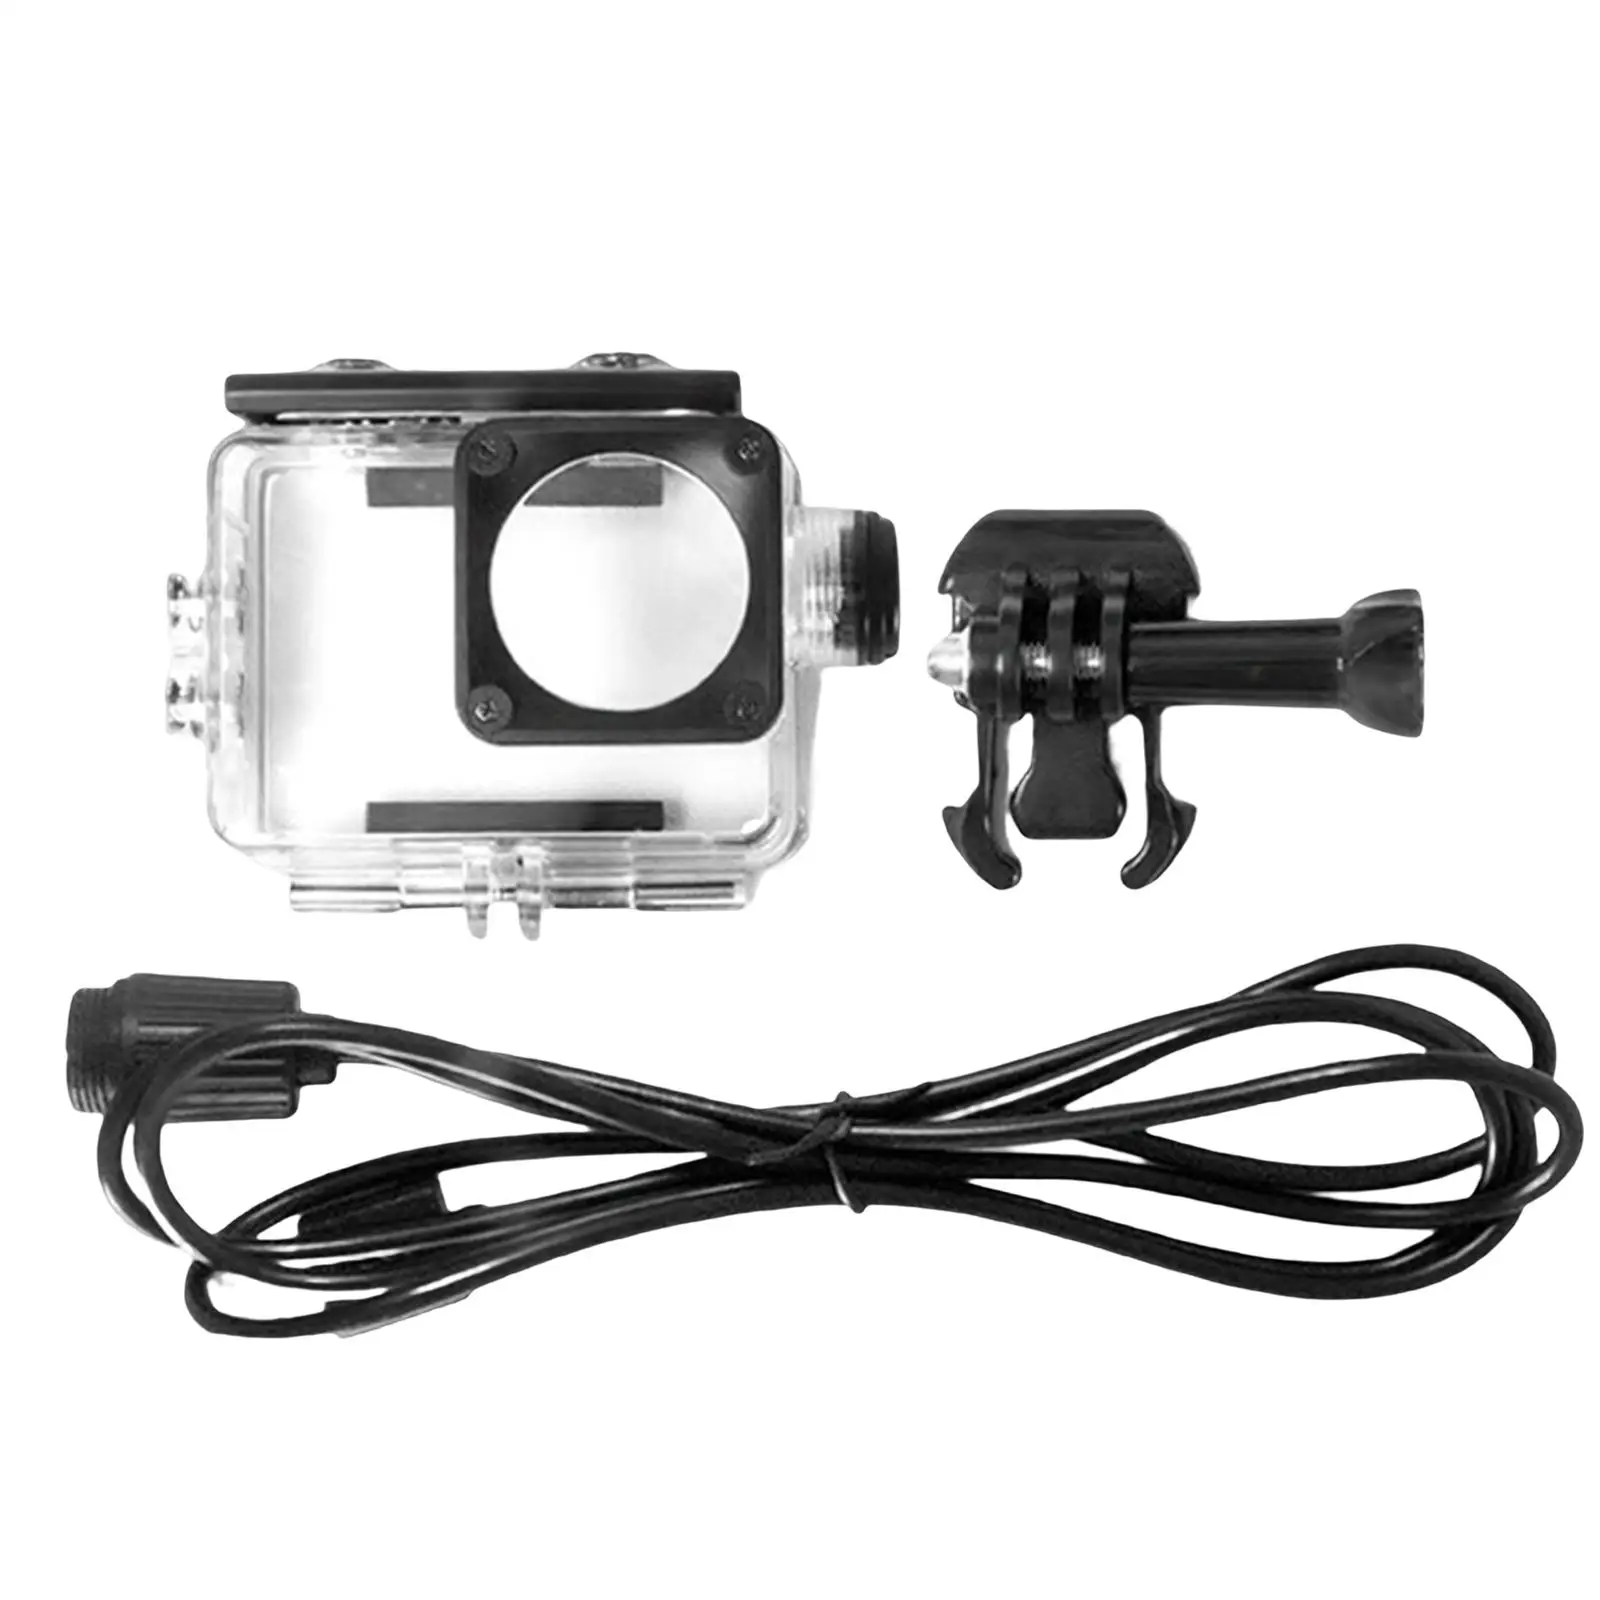 Action Camera Waterproof Housing Case, Diving Housing Frame Mount Photography Quick Release Mount Shell for 4K Eis Cameras